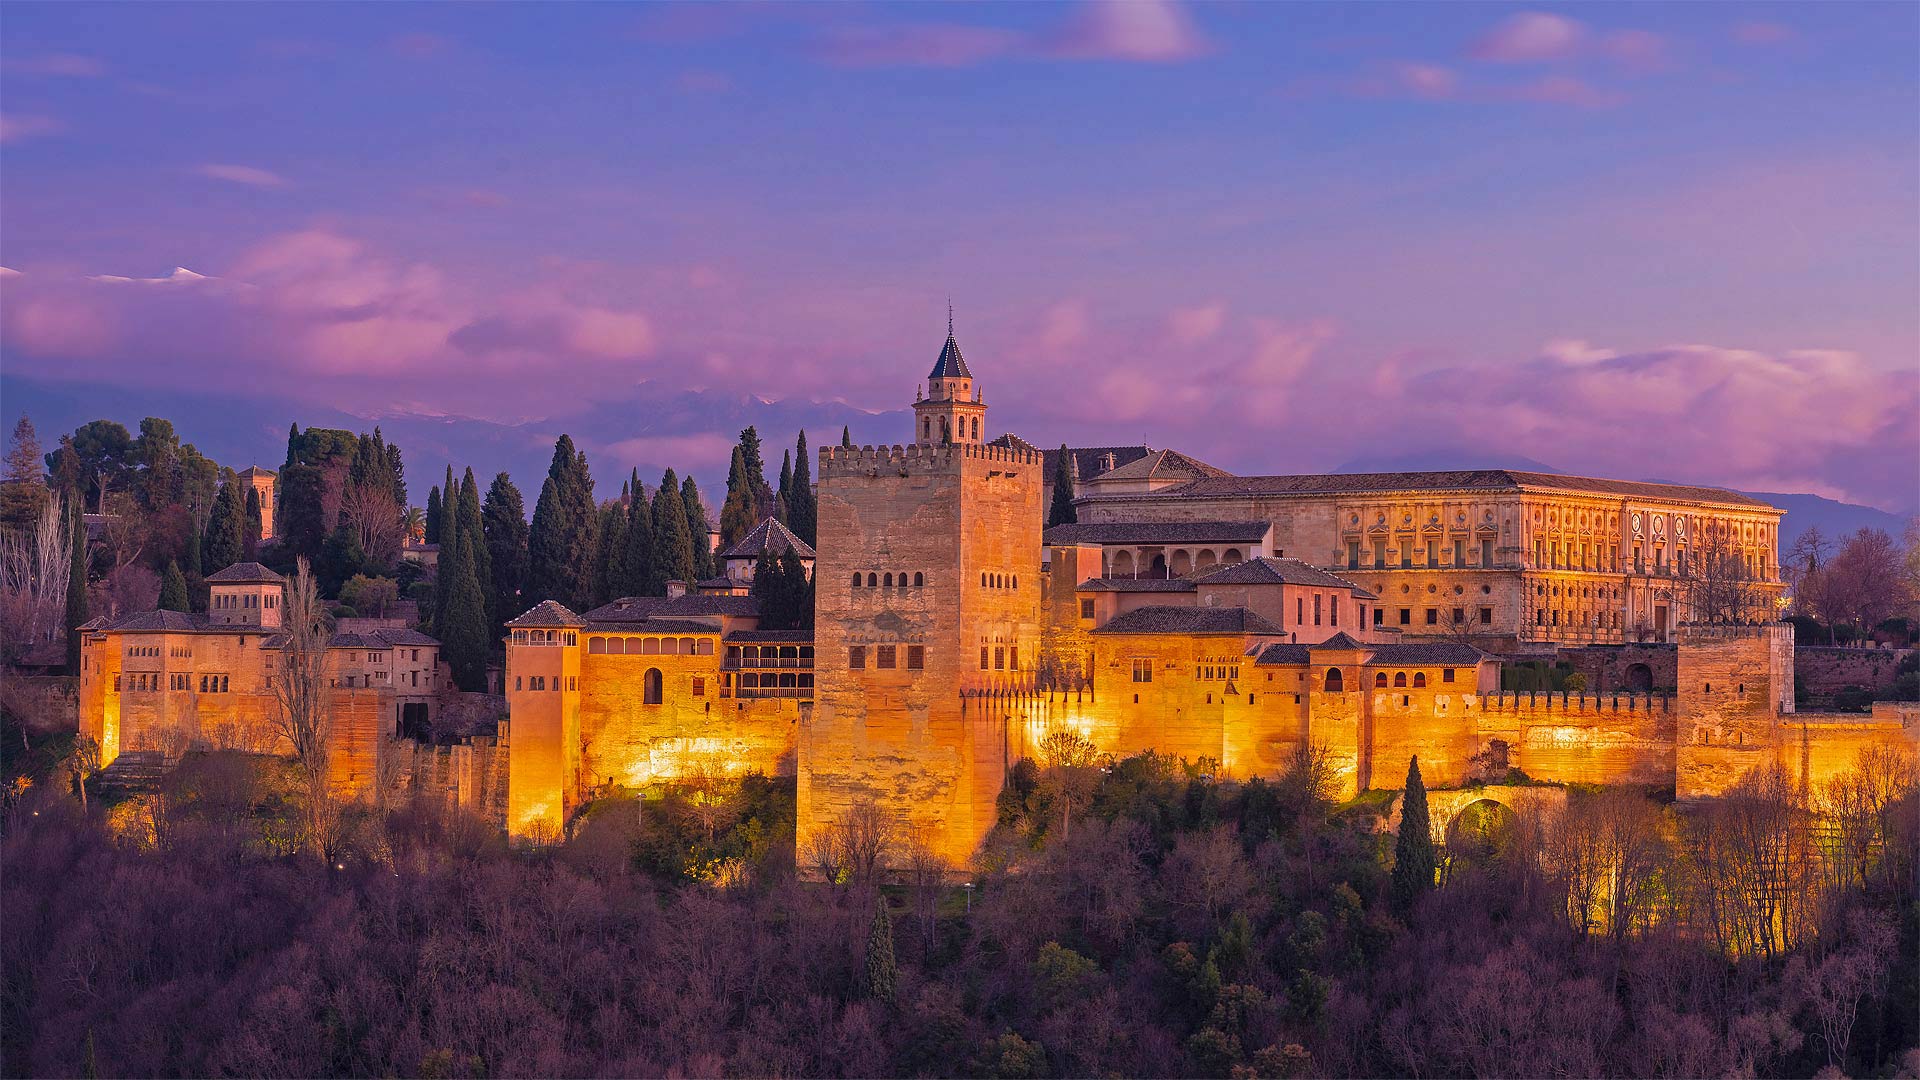 Alhambra in Granada, Andalusia, Spain - Armand Tamboly/Getty Images)